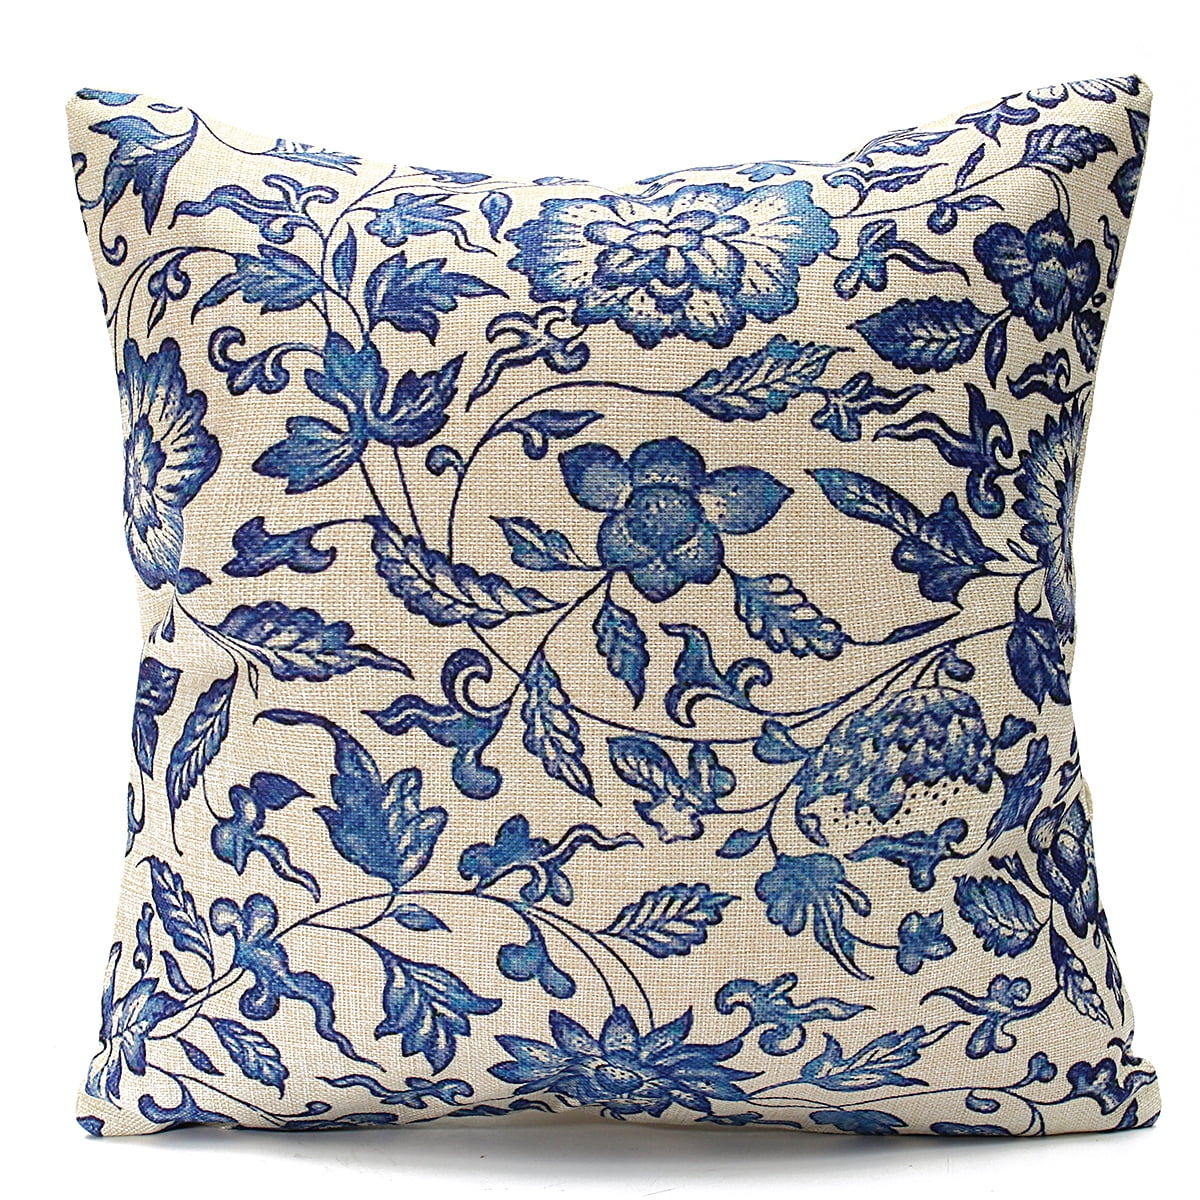 Golee Throw Pillow Cover Blue Oriental with Japanese Chrysanthemums Inscription Autumn Garden of Green Asian Decorative Pillow Case Home Decor Square 20x20 Inches Pillowcase